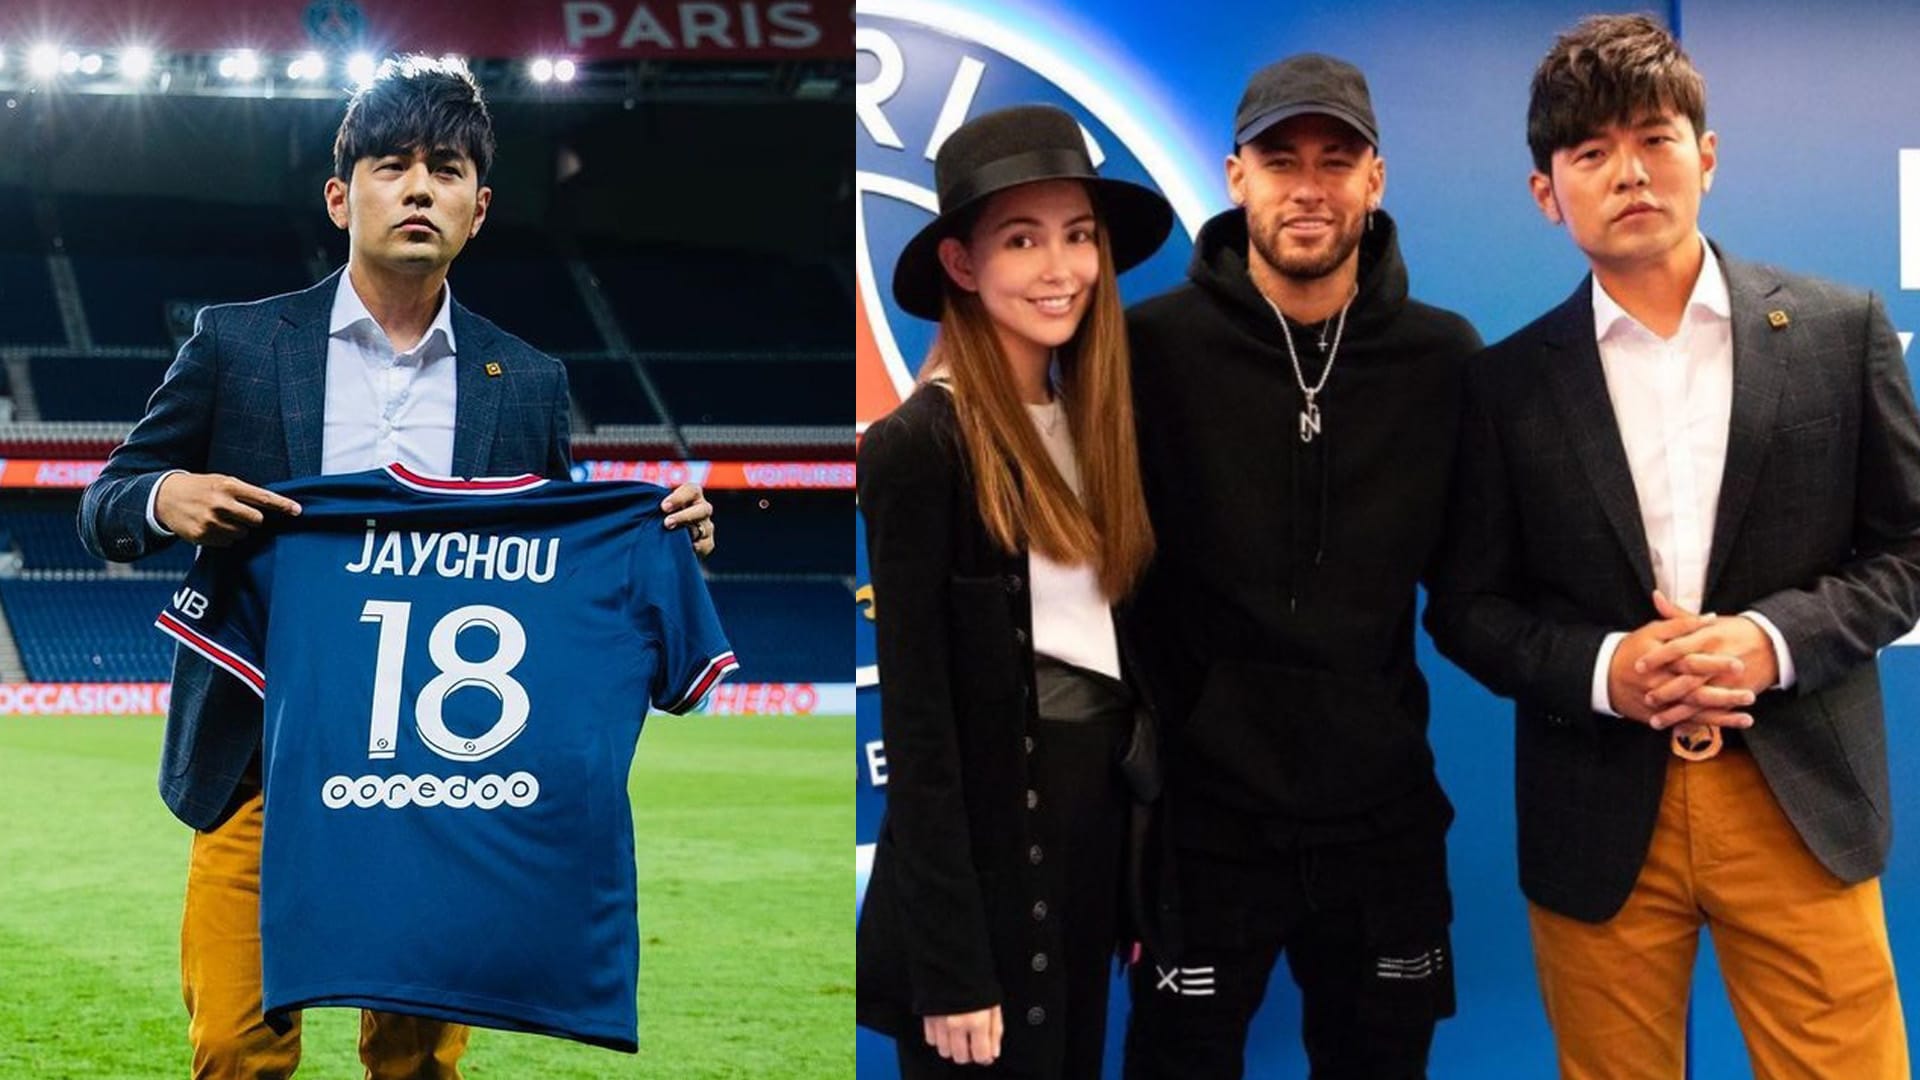 Jay Chou Living It Up In Paris, Gets VIP Treatment At PSG Match